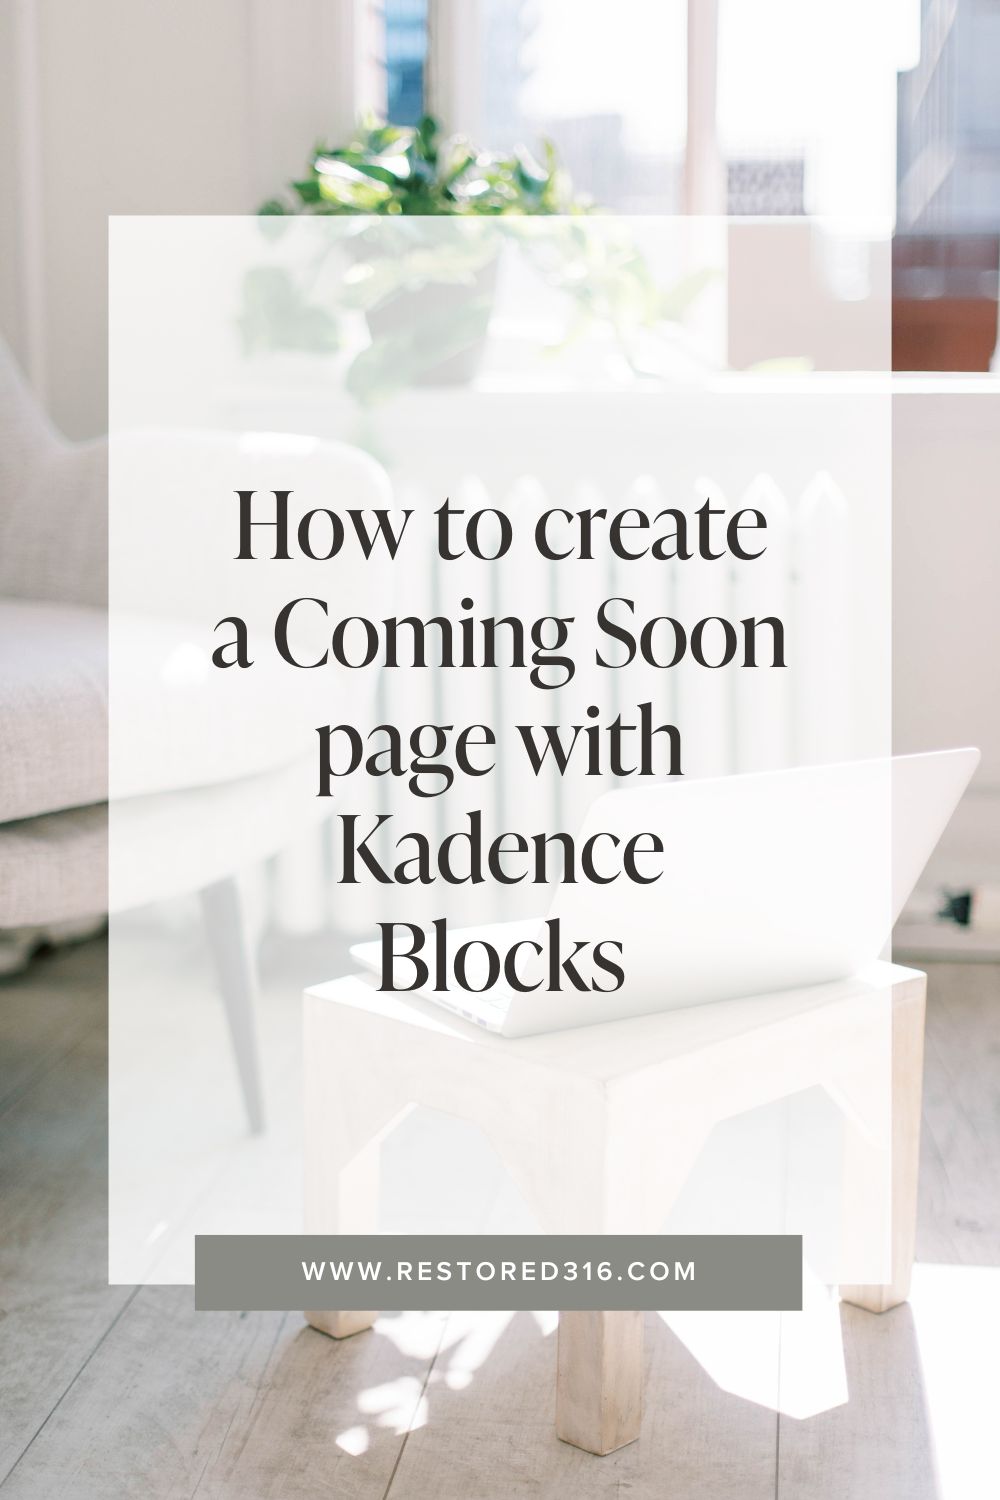 How to create a Coming Soon page with Kadence Blocks Pinterest